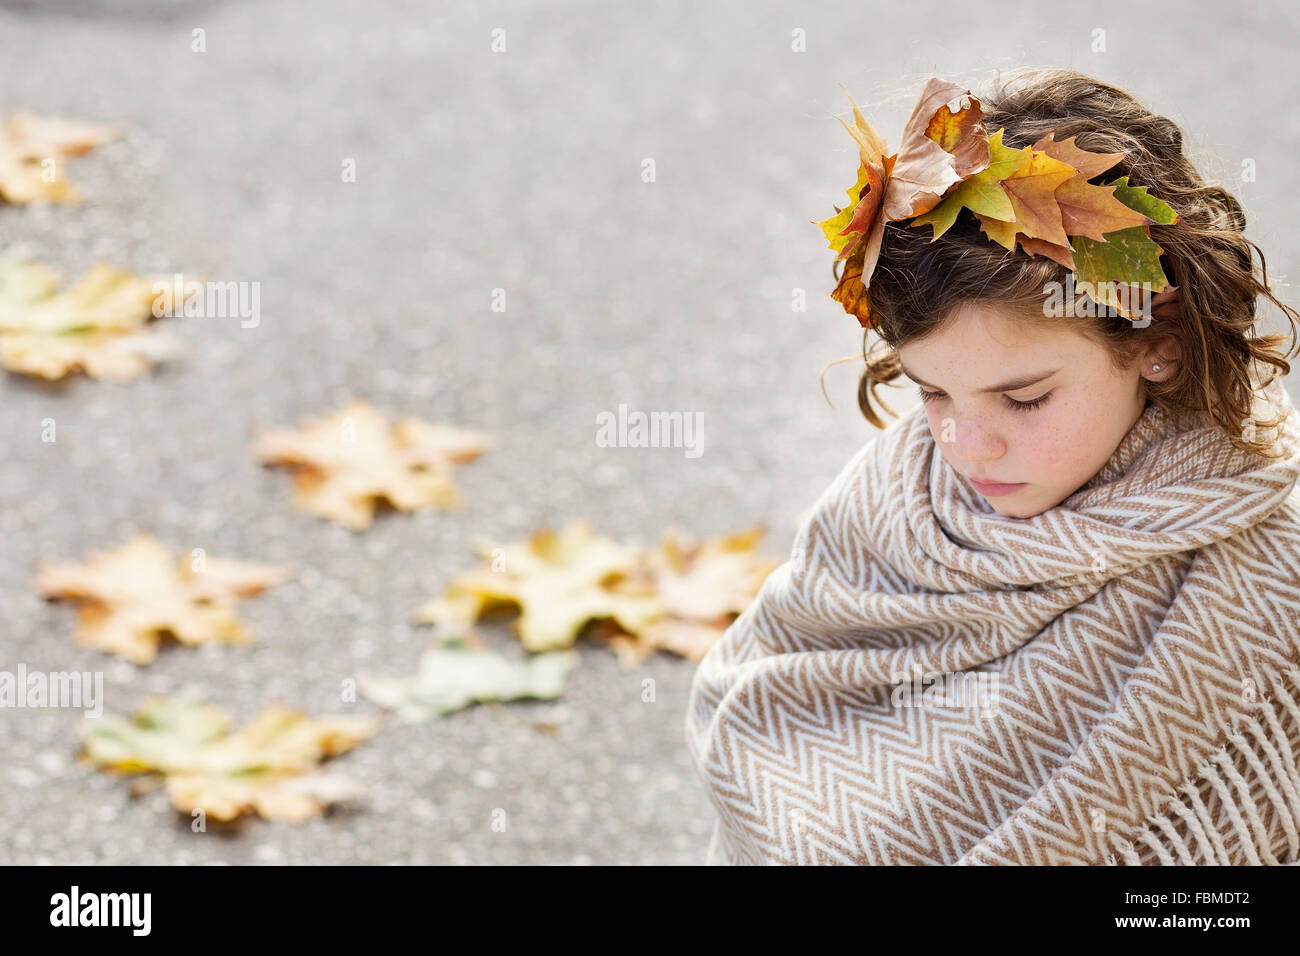 Girl wrapped in a blanket wearing headdress made of autumn leaves Stock Photo